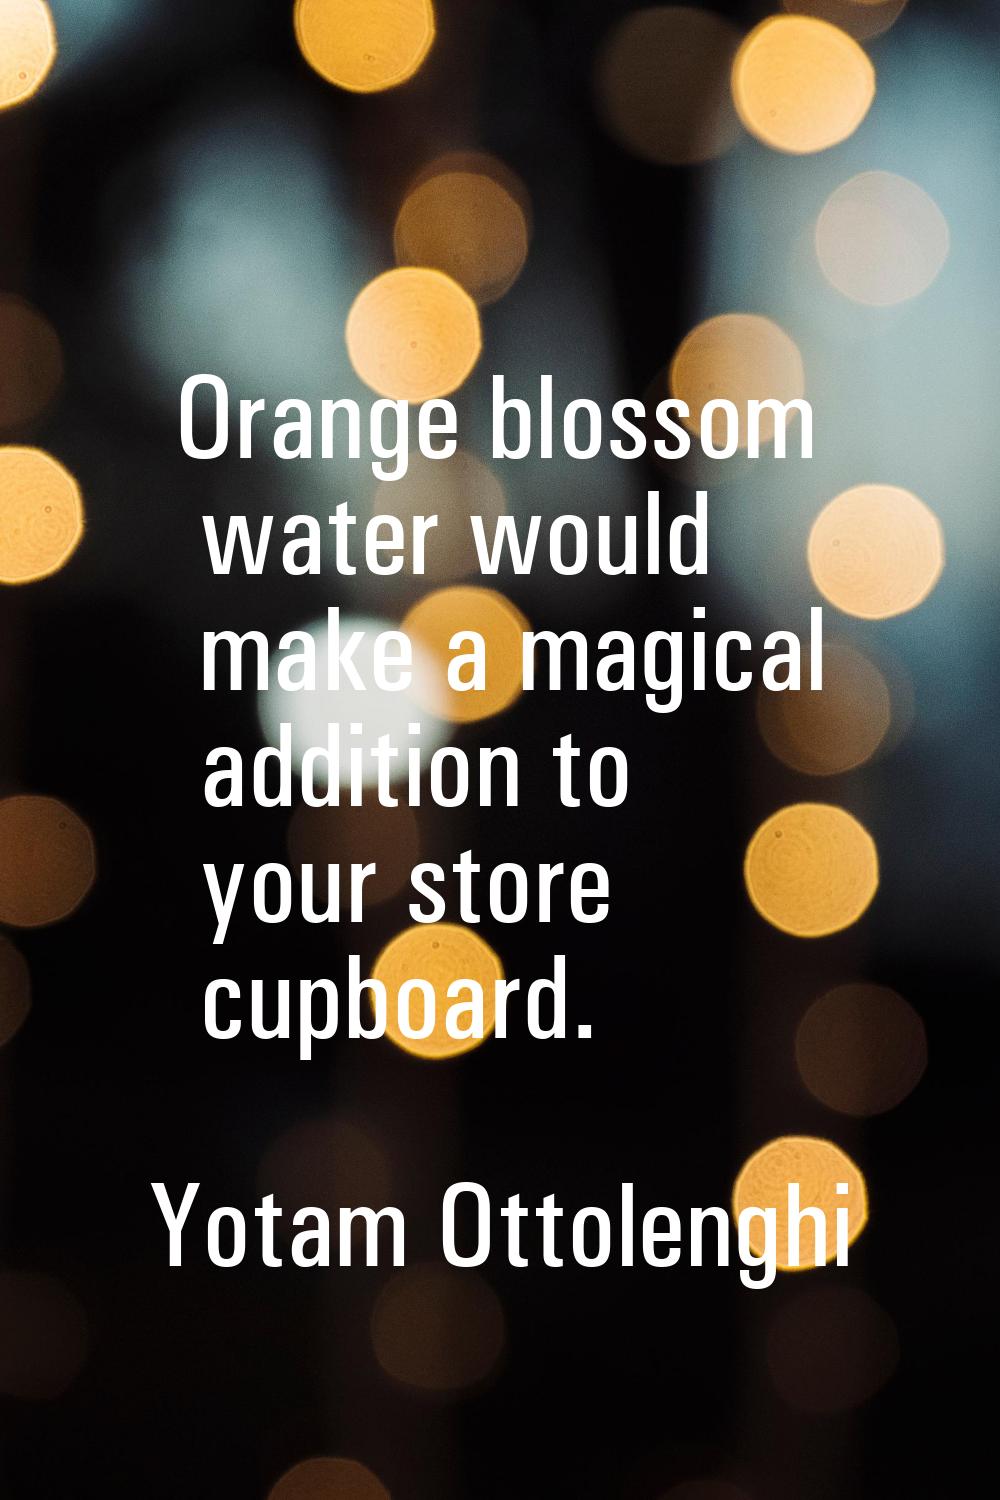 Orange blossom water would make a magical addition to your store cupboard.